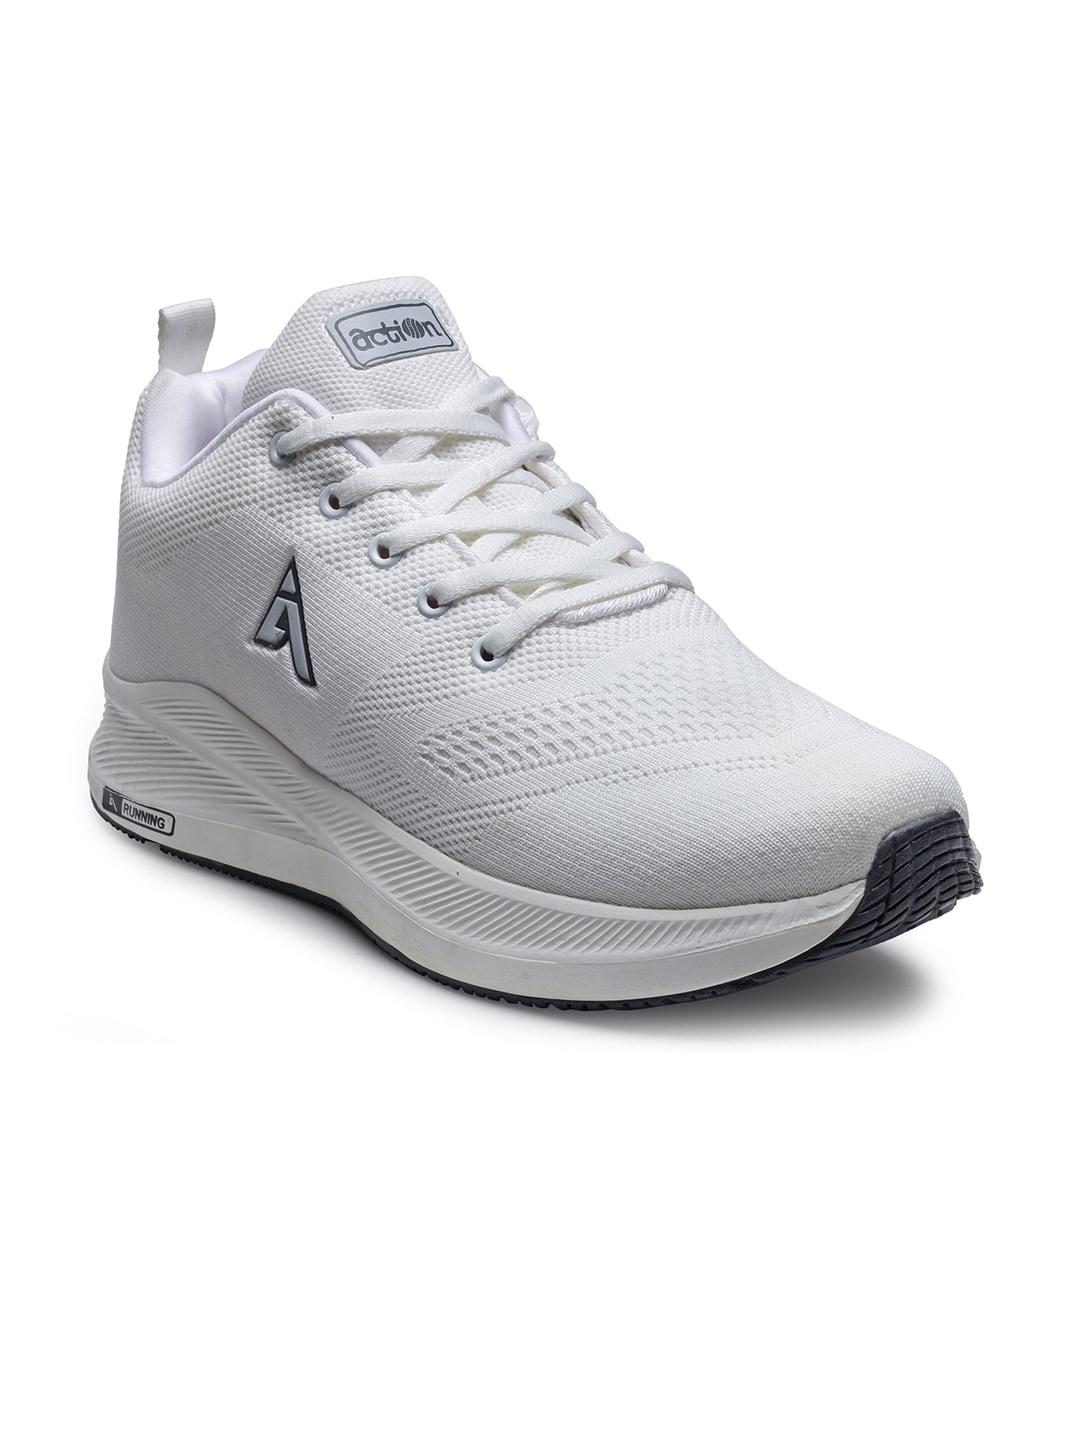 action-men-white-mesh-running-non-marking-lace-ups-shoes